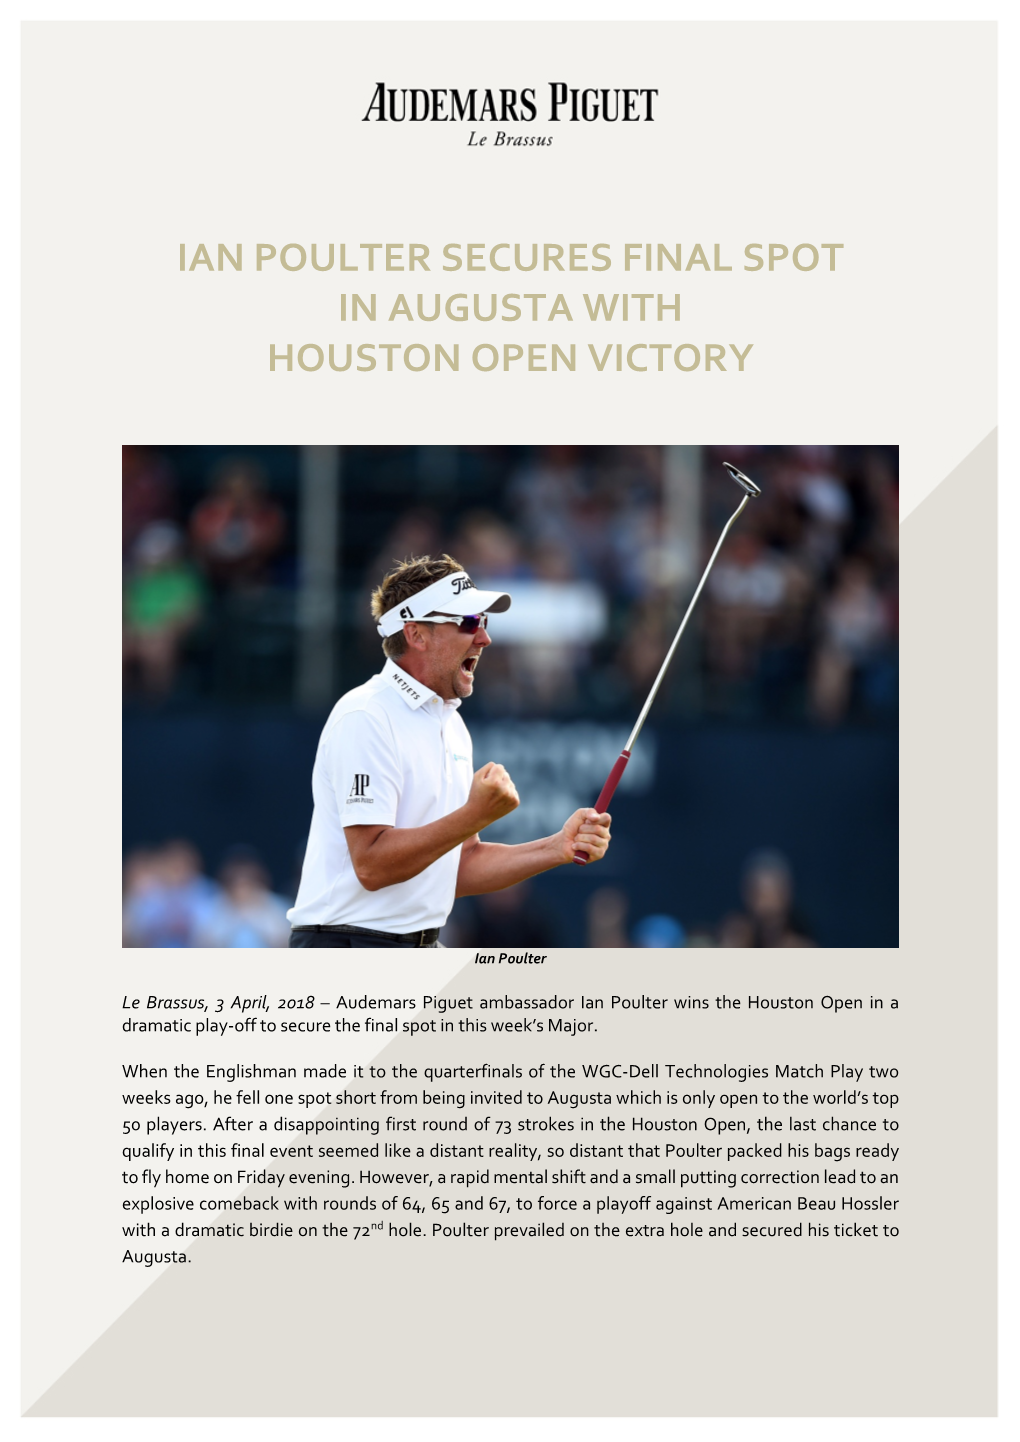 Ian Poulter Secures Final Spot in Augusta with Houston Open Victory